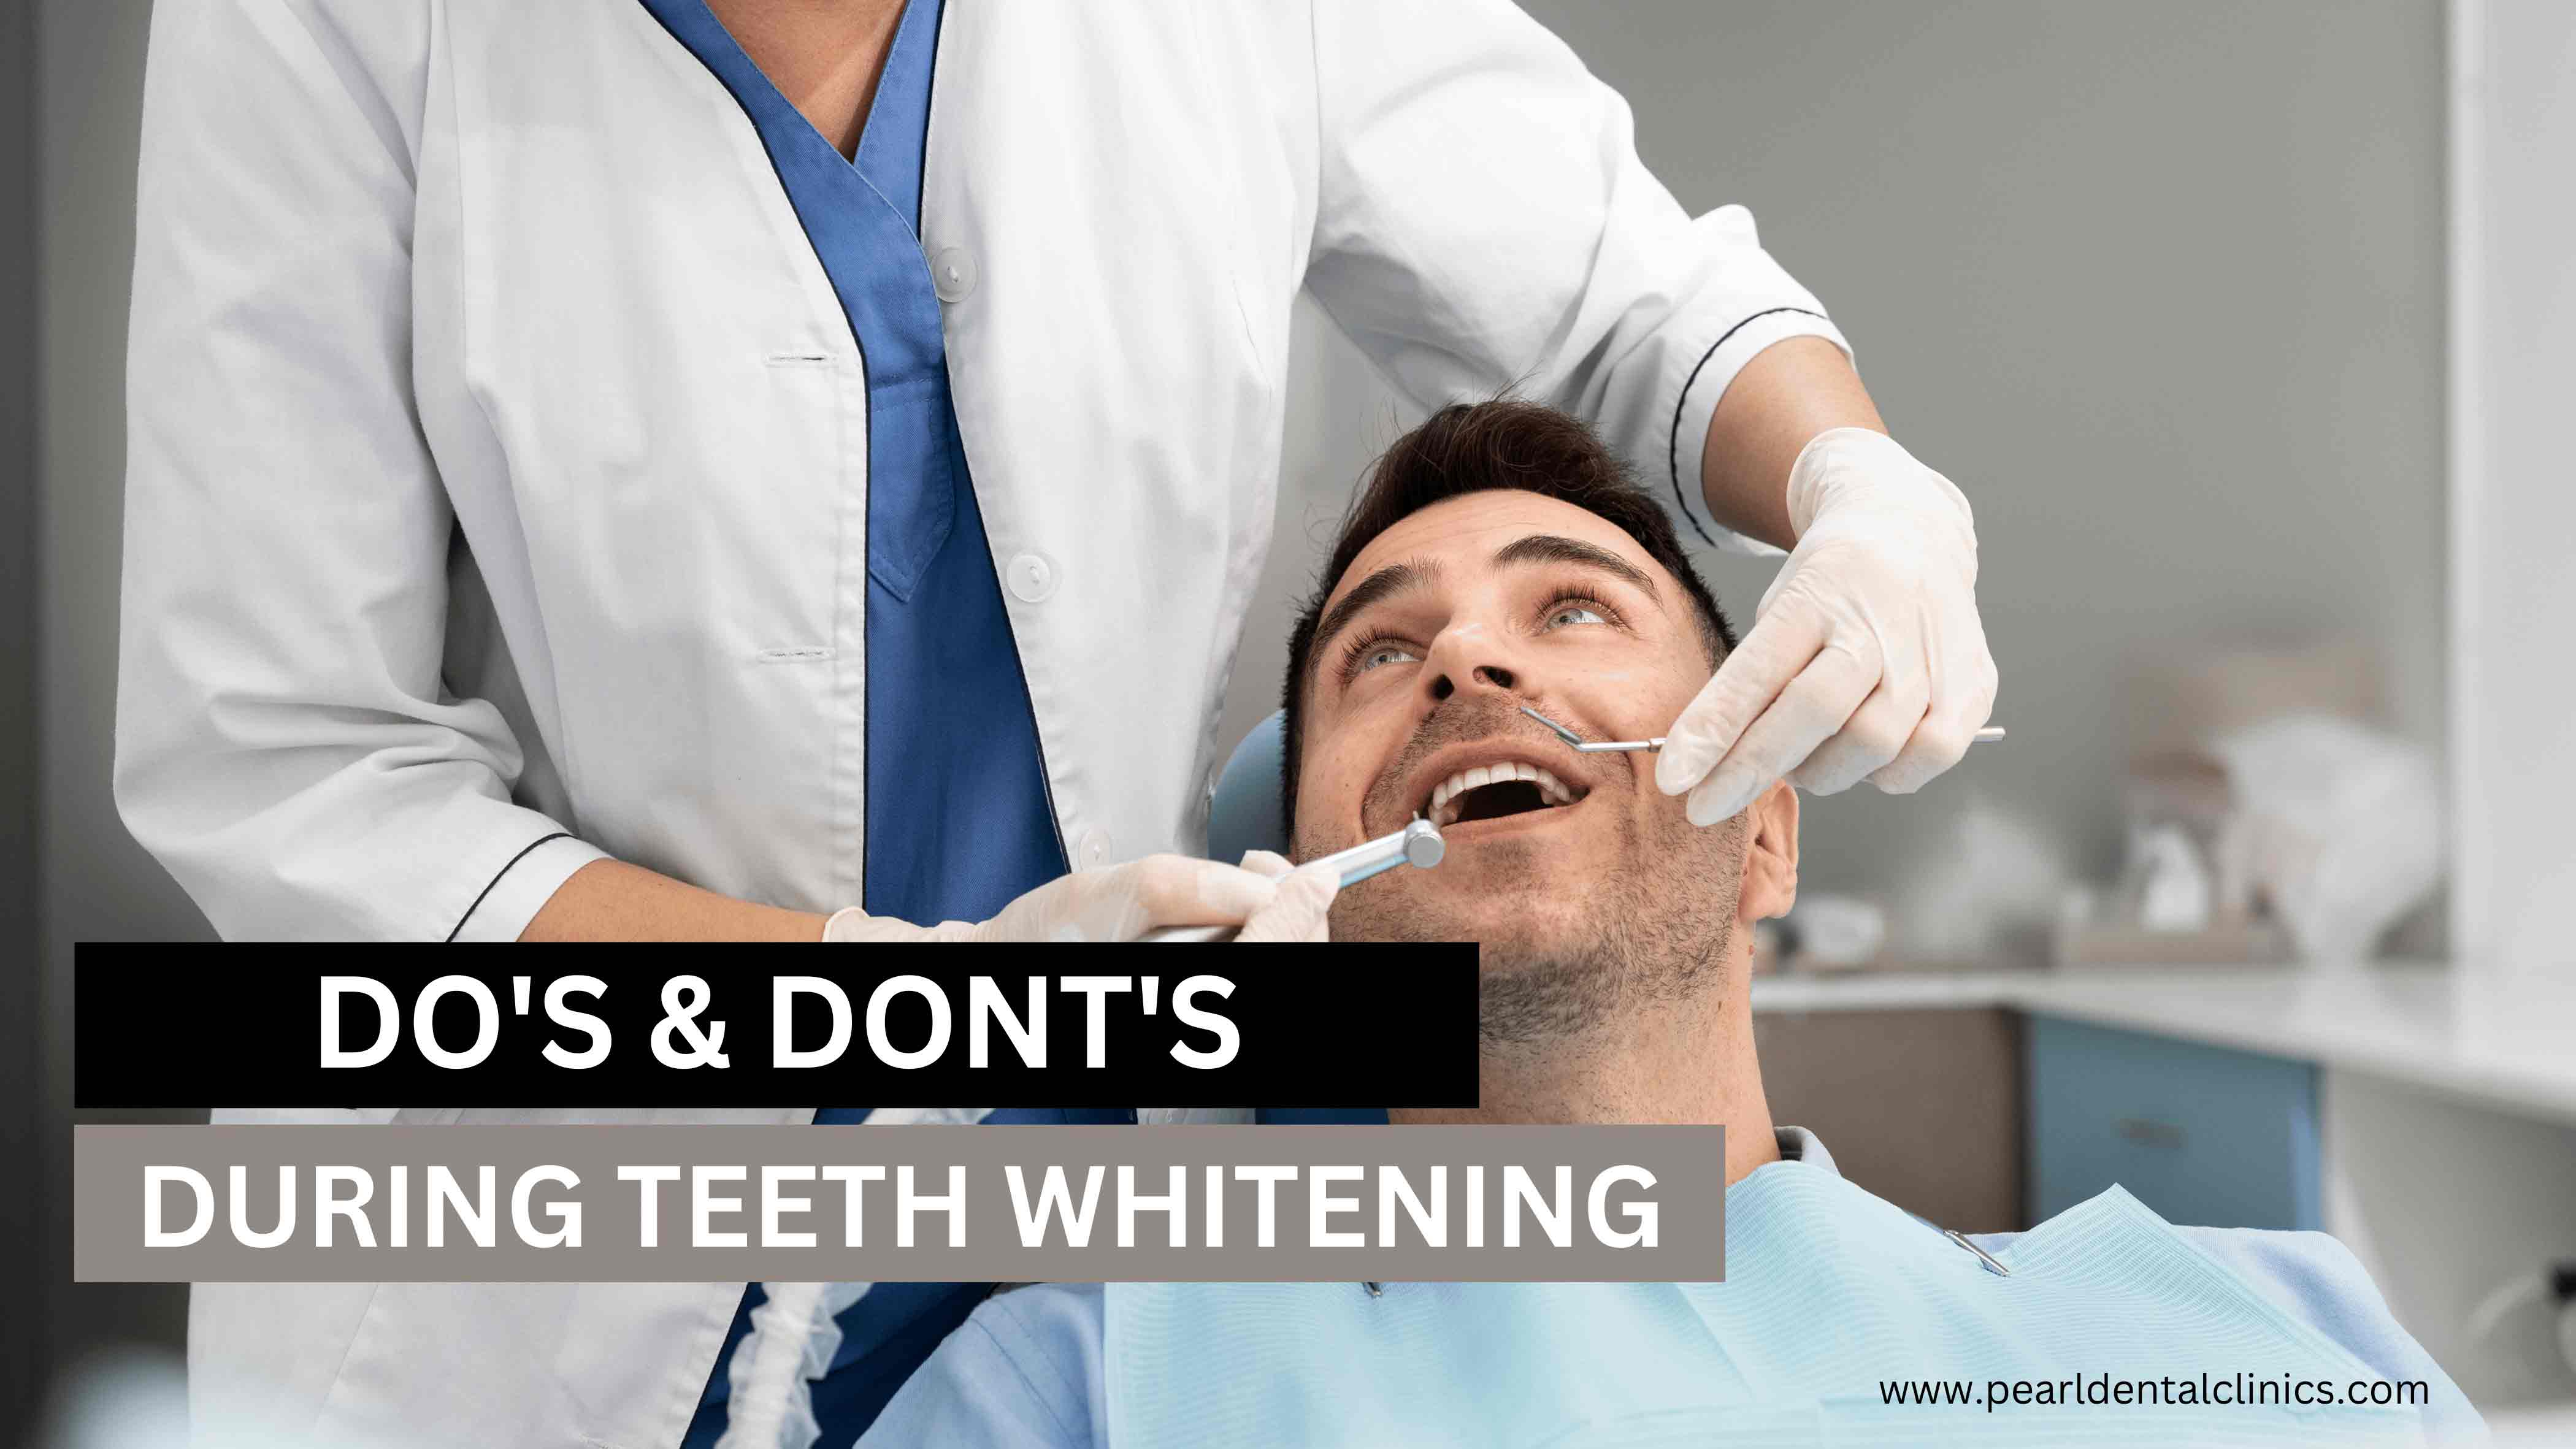 TEETH WHITENING: THINGS YOU NEED TO KNOW